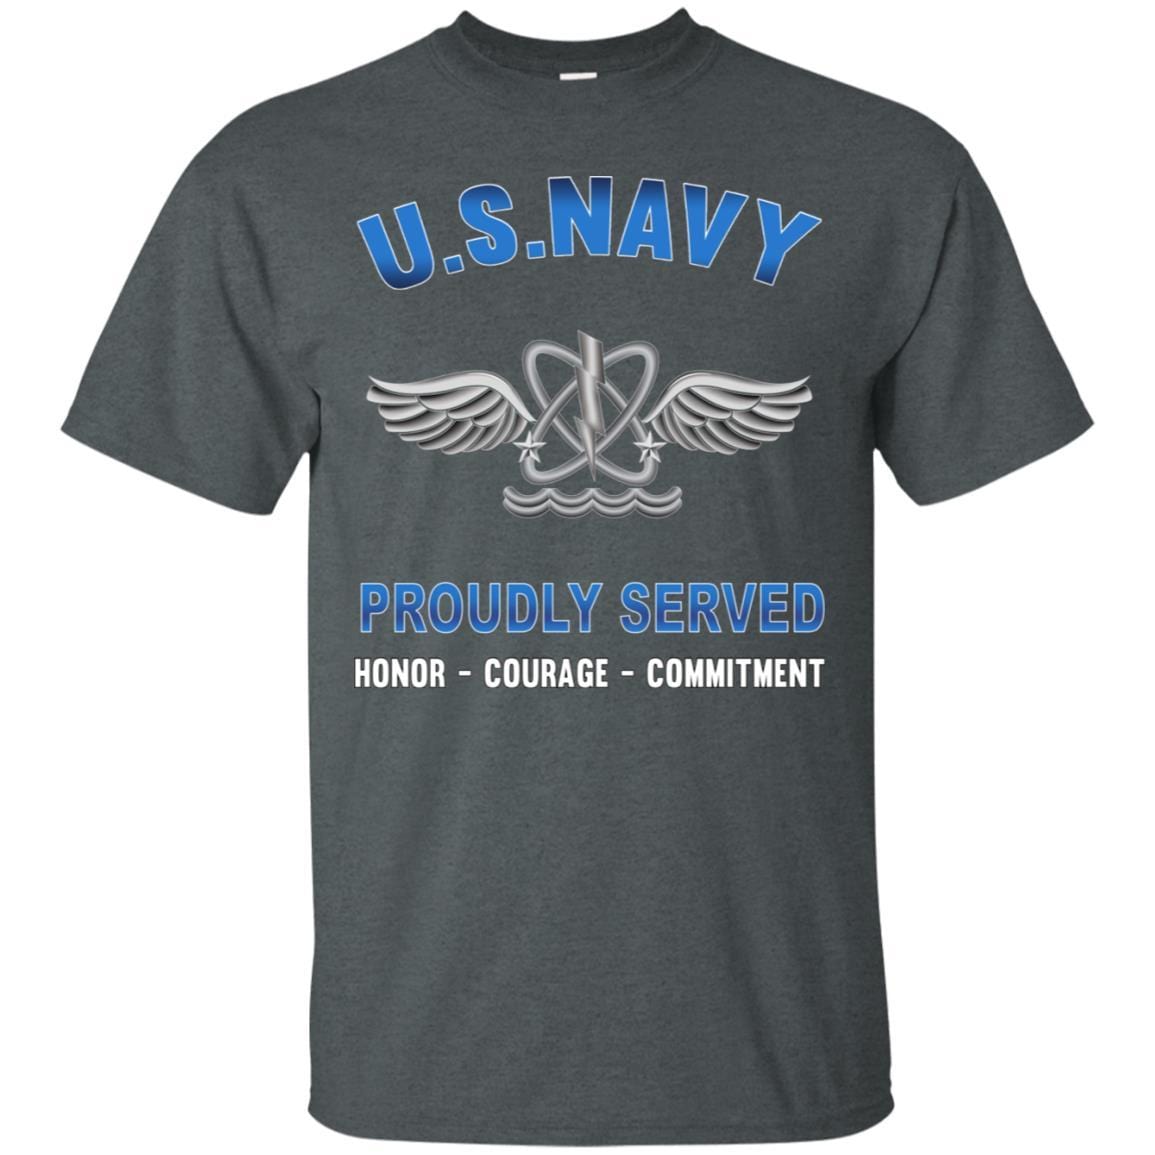 U.S Navy Naval aircrewman Navy AW - Proudly Served T-Shirt For Men On